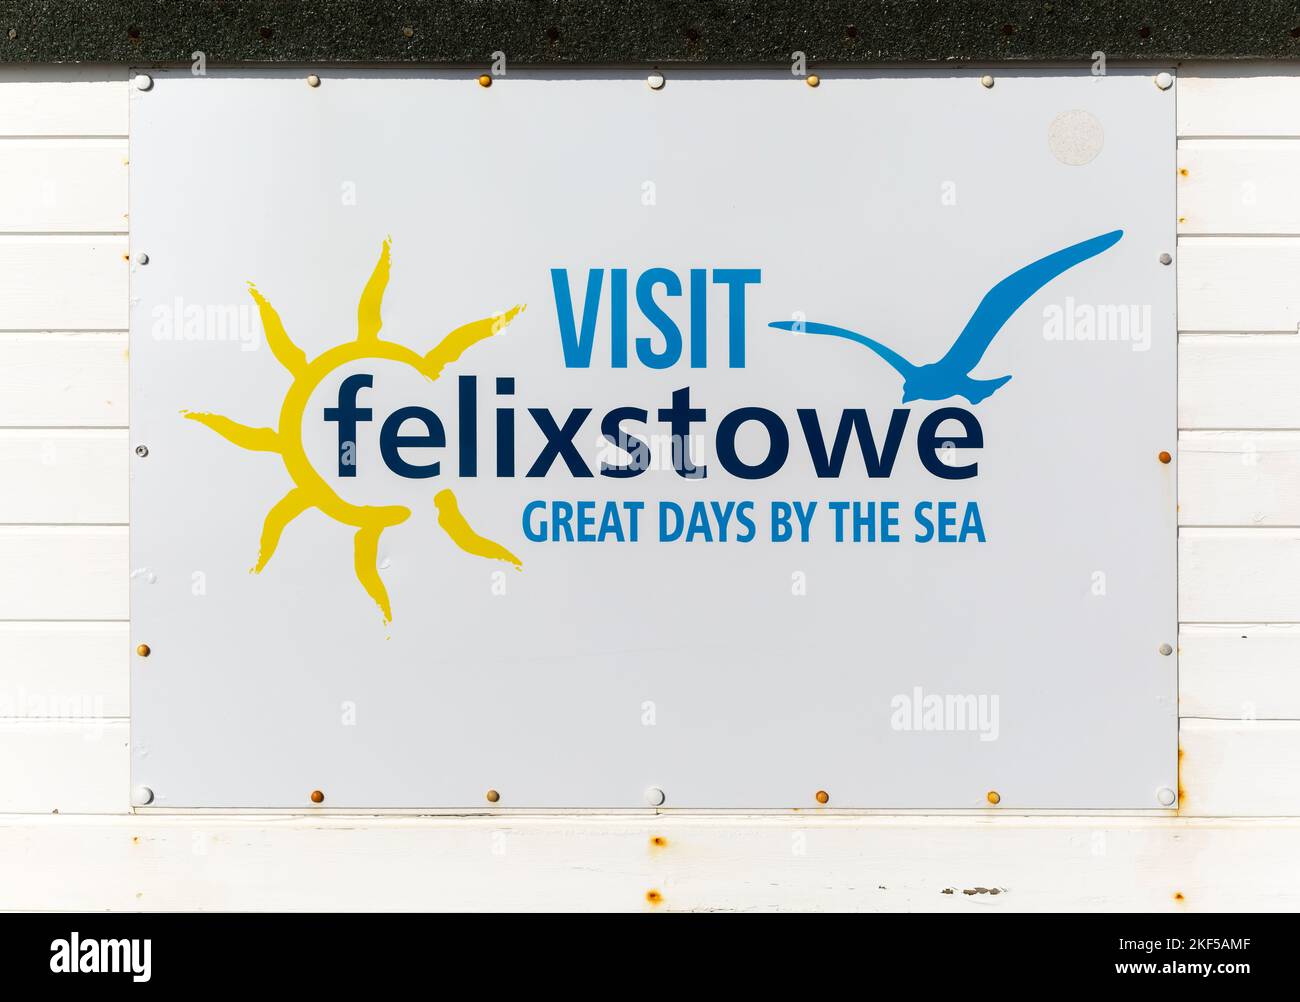 Visit Felixstowe tourism campaign poster on beach hut, Felixstowe, Suffolk, England, UK Great Days by the Sea Stock Photo